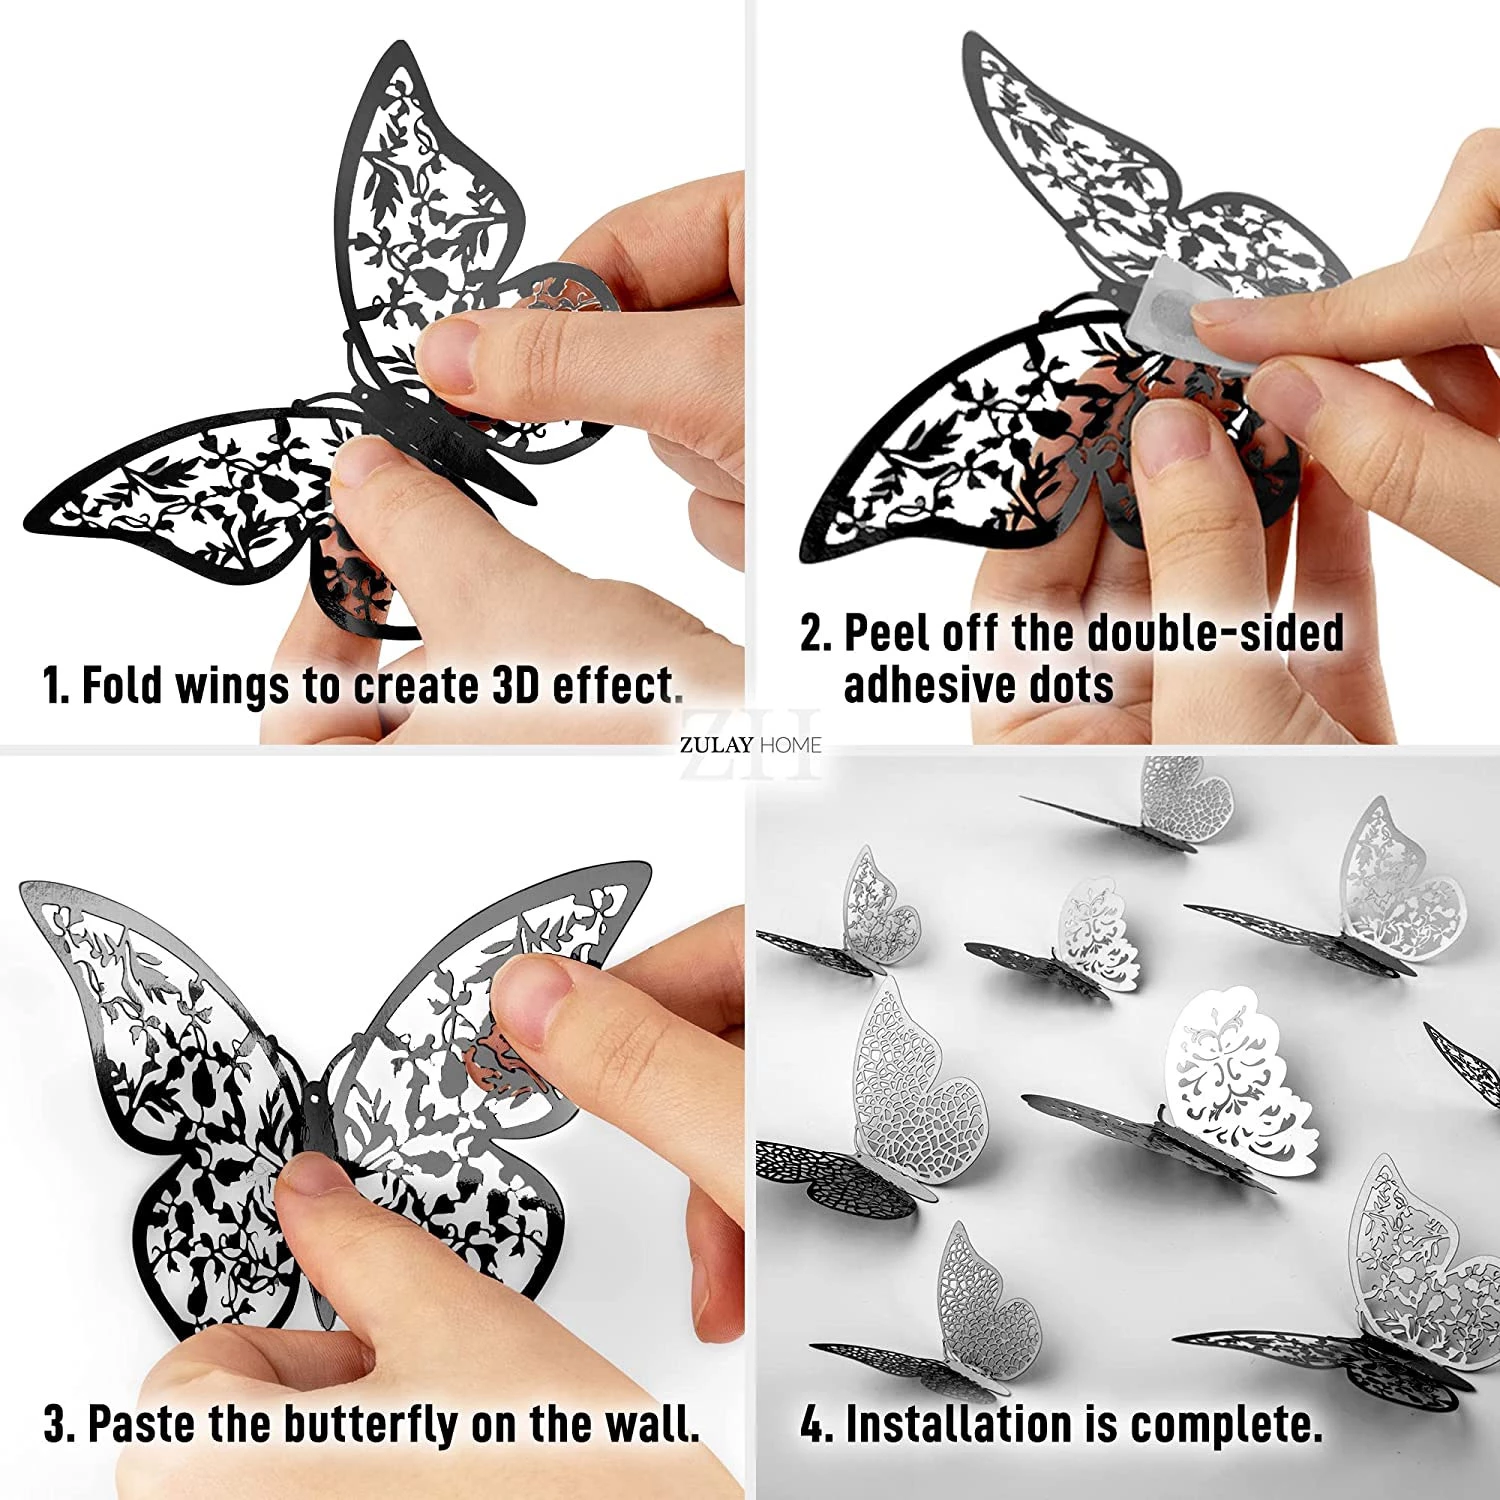 Zulay Home 3D Butterfly Wall Decor - 24pcs Butterfly Decor with 3 Different Sizes